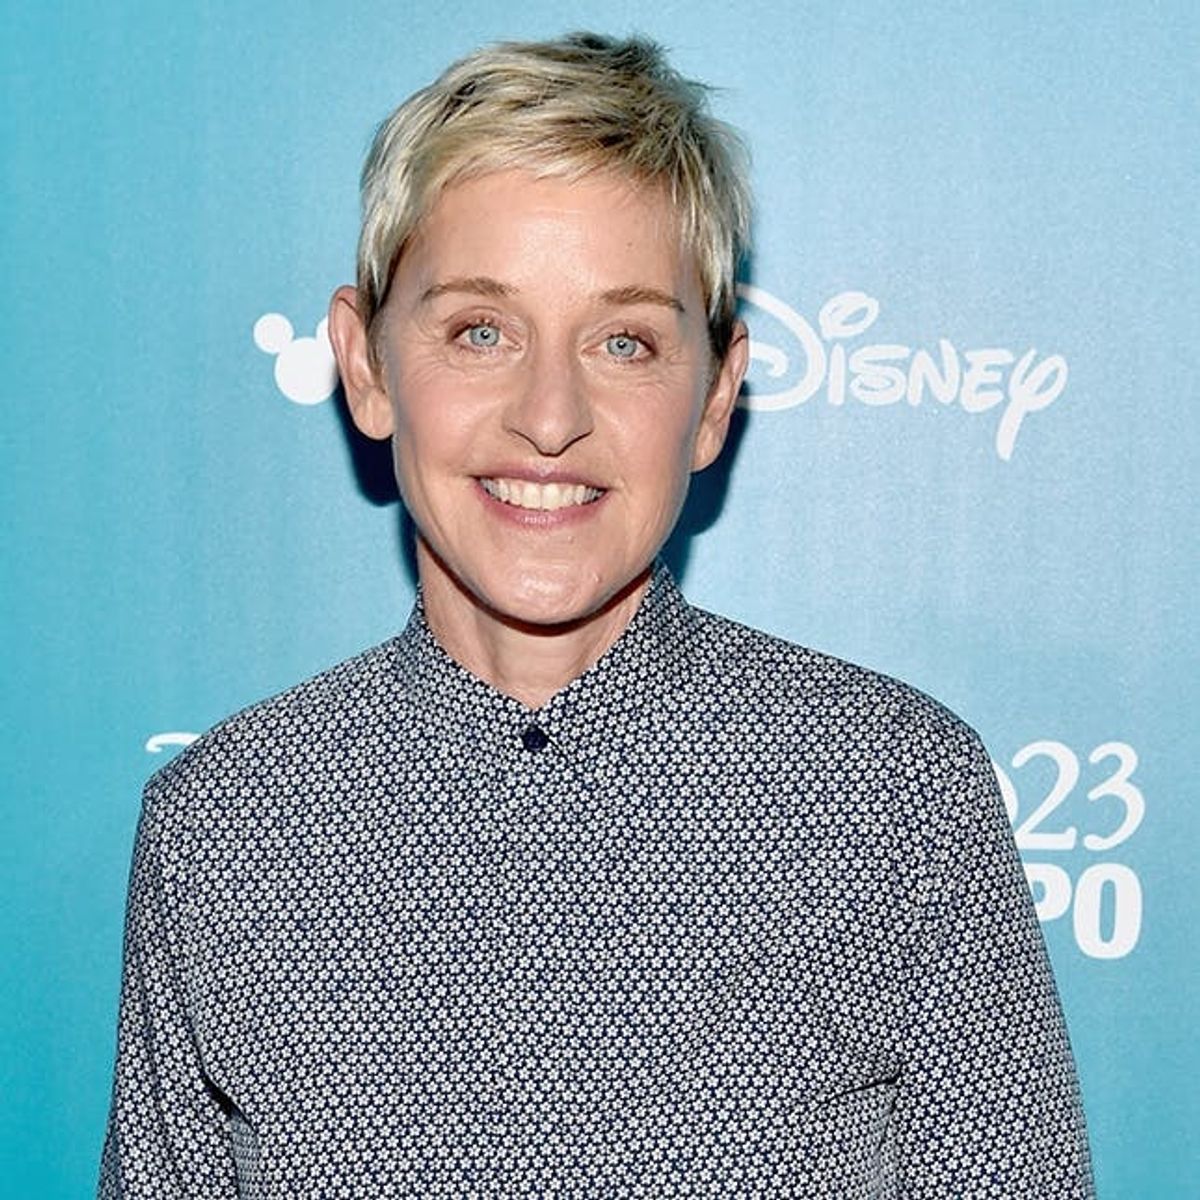 Ellen DeGeneres Is Launching Something That Will Make You Want to Dance